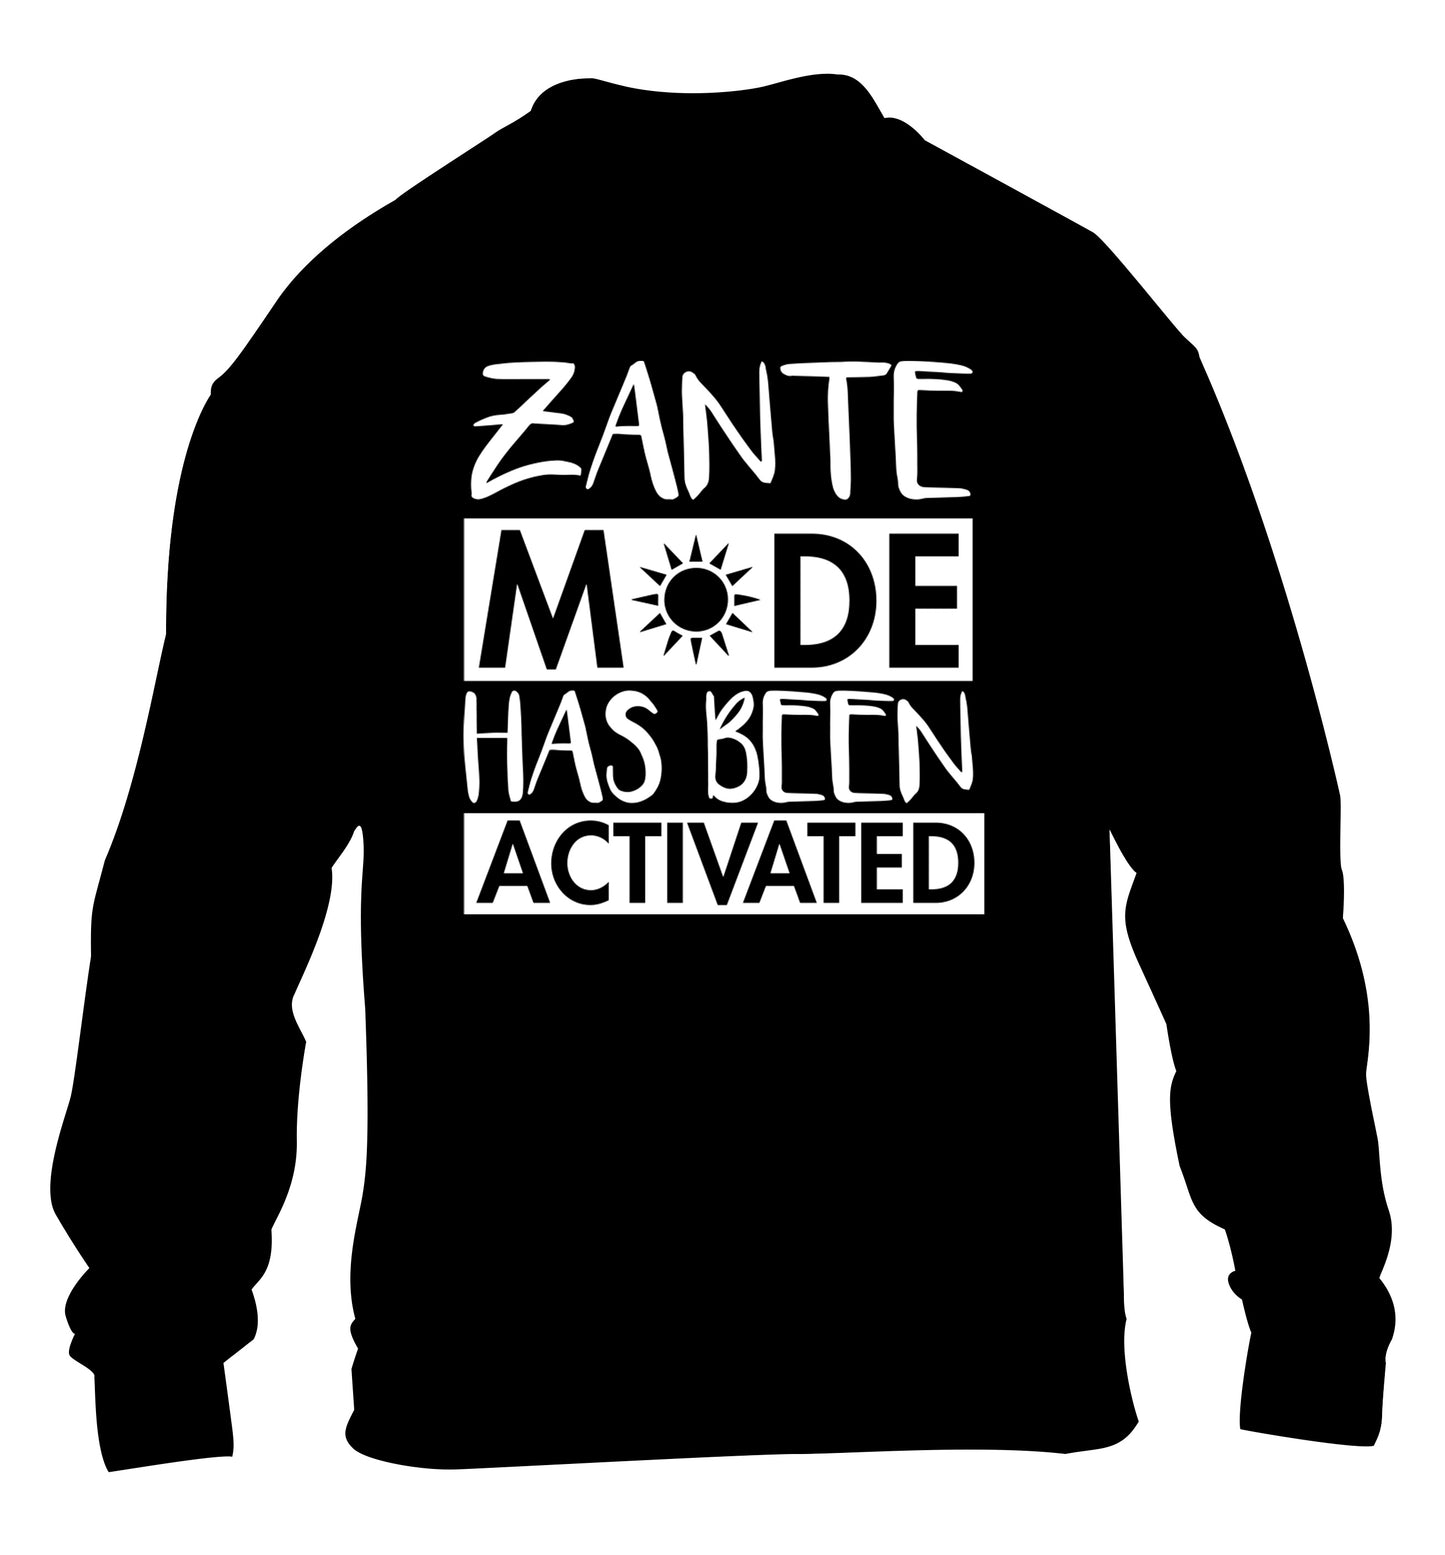 Zante mode has been activated children's black sweater 12-13 Years